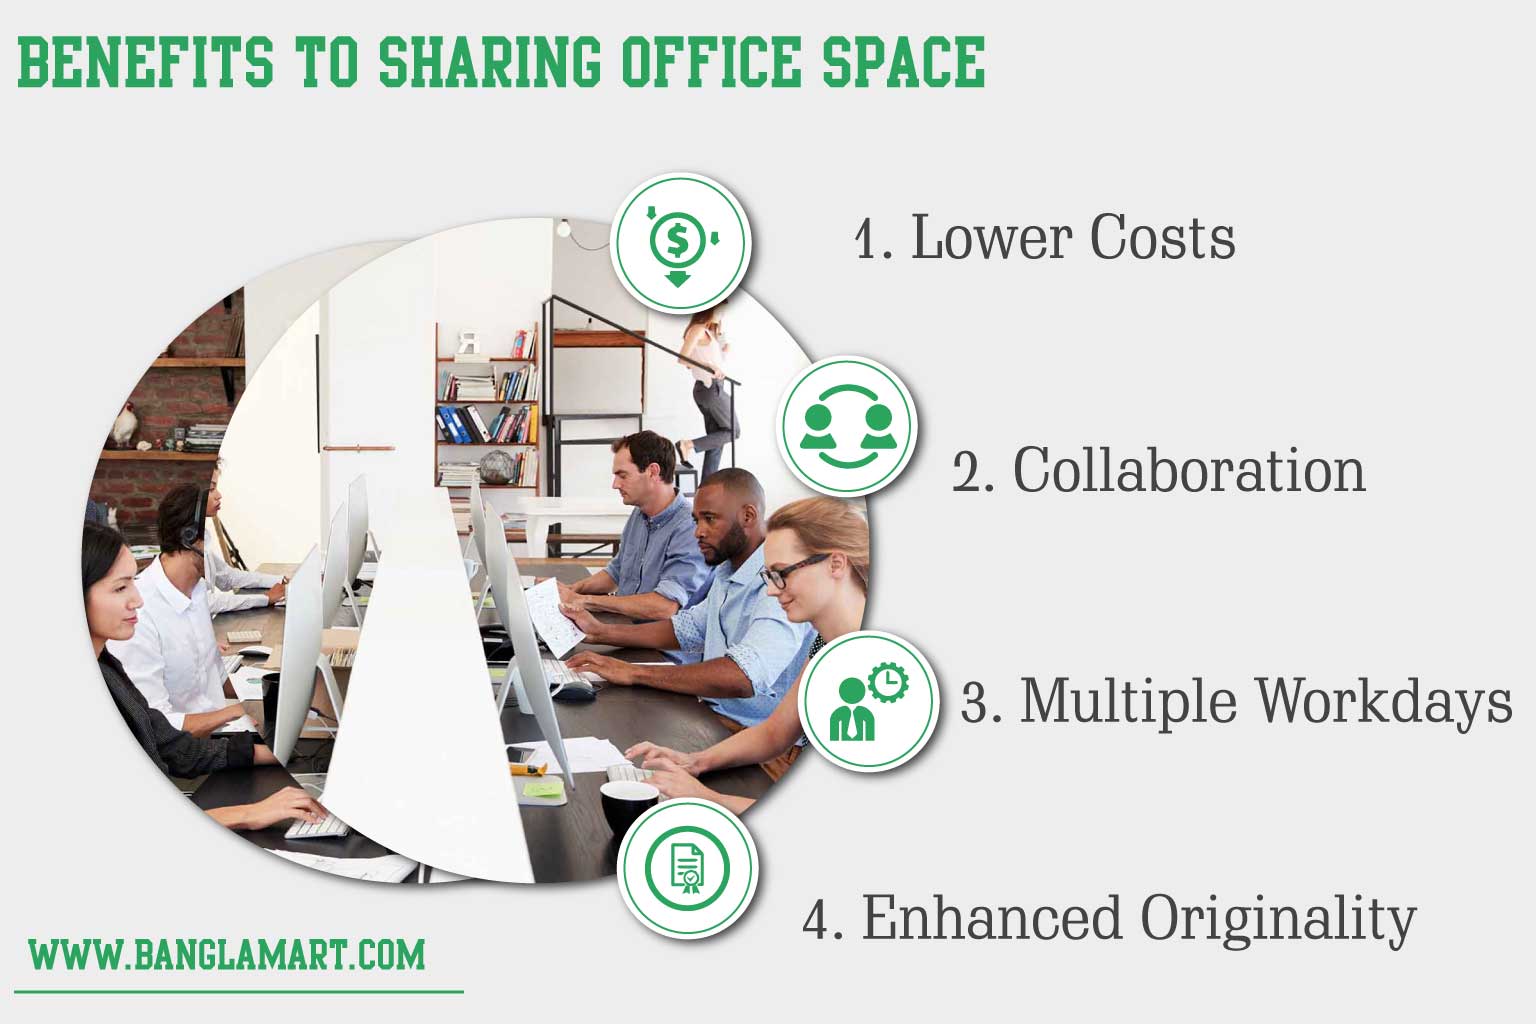 Benefits to Sharing Office Space